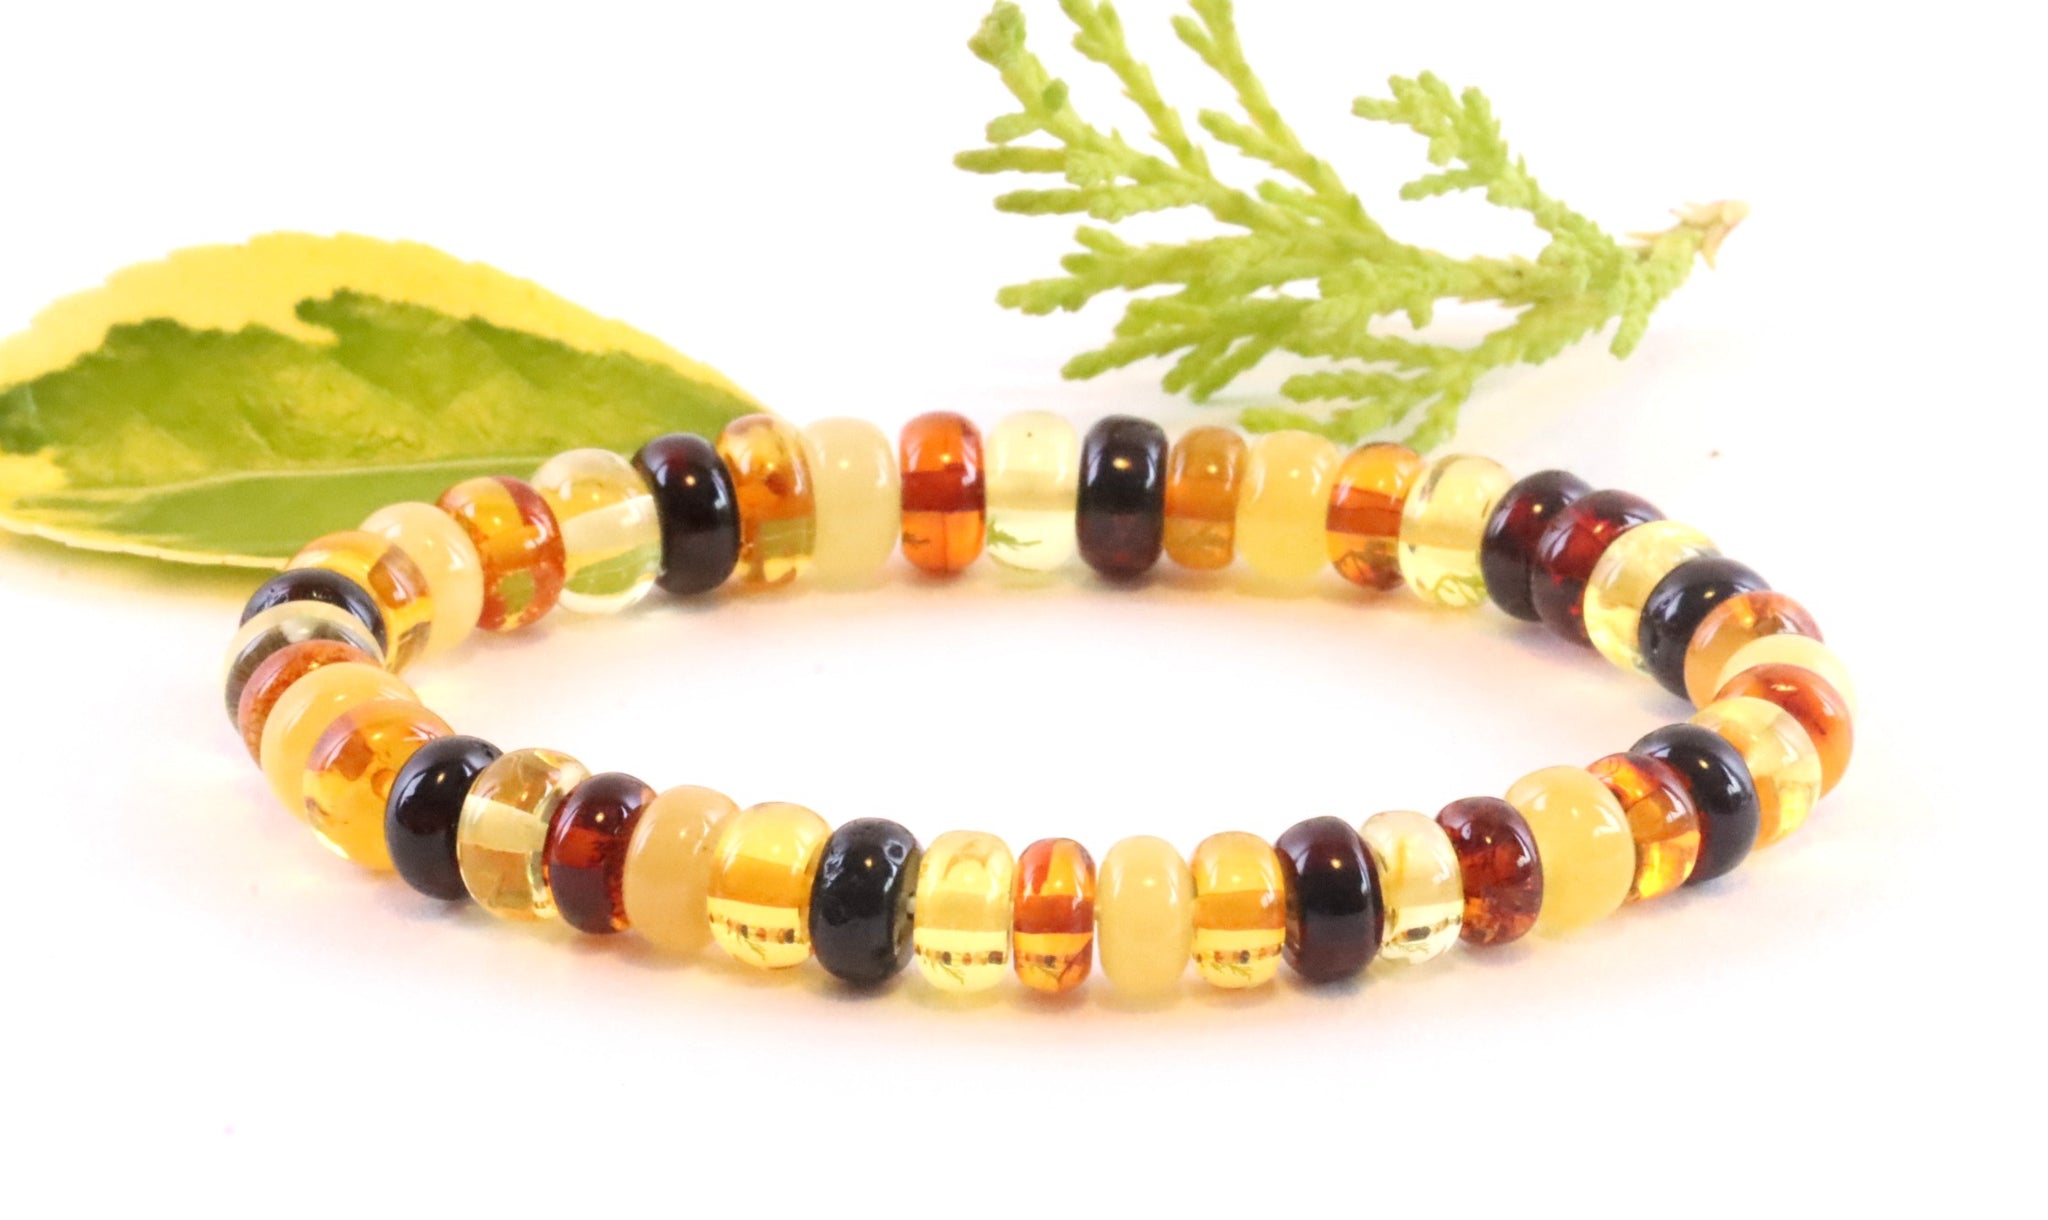 Adult Bracelet Pain Relief or Hormonal 7.5 inch Stretch - Maximum Amber Polished Cherry